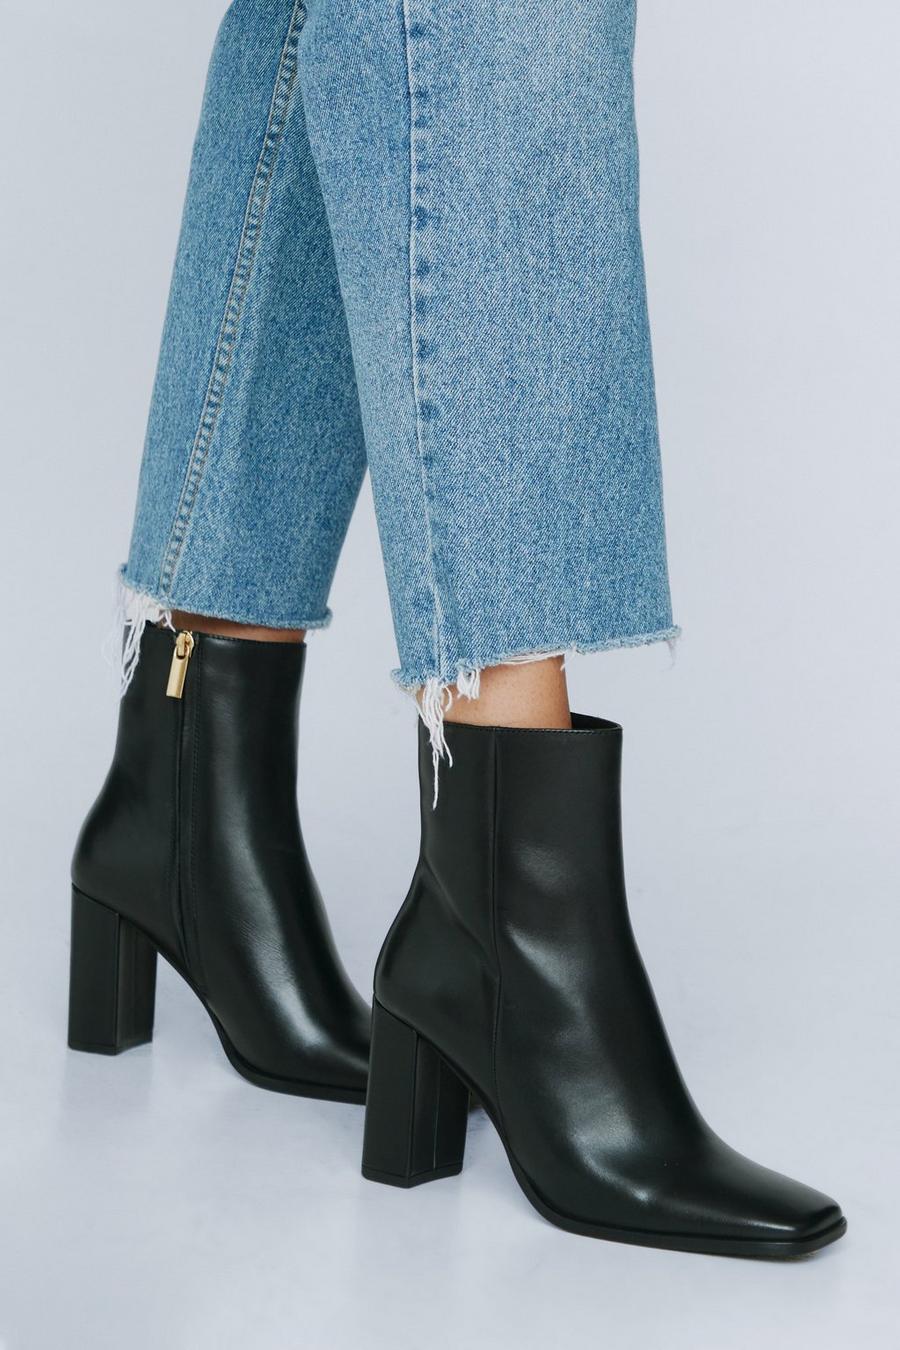 Ankle Boots |Women's Ankle Booties | Nasty Gal